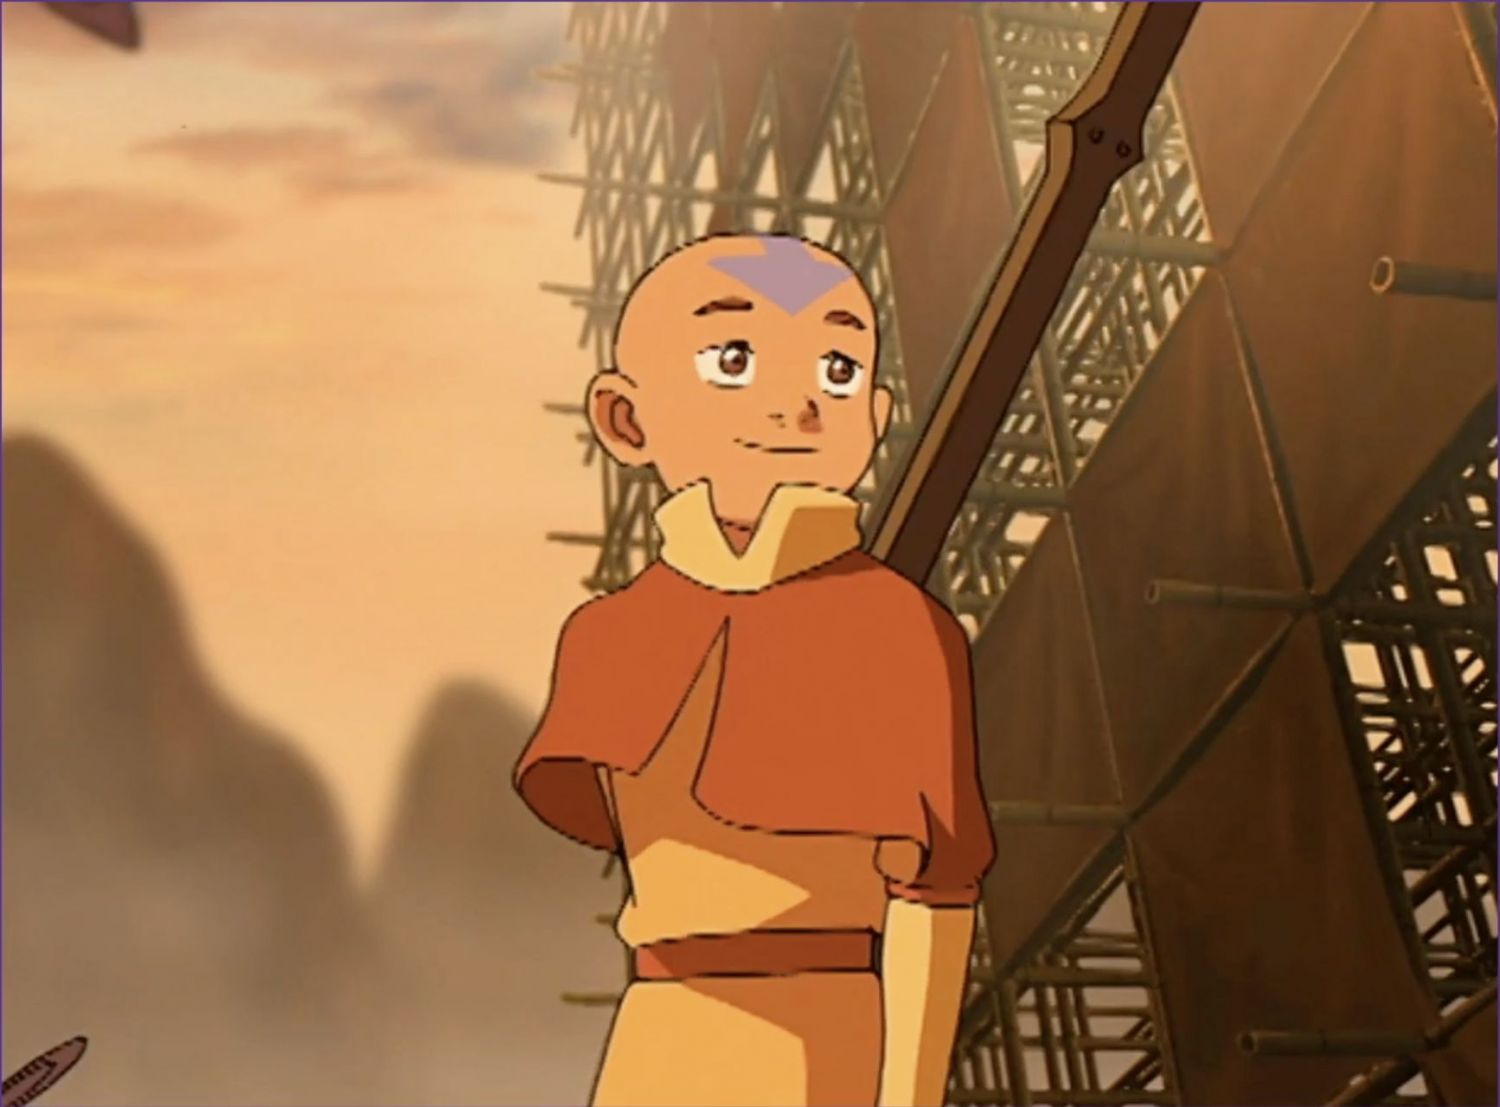 Unaired Avatar The Last Airbender Pilot Episode Released By Nickelodeon   Geek Culture